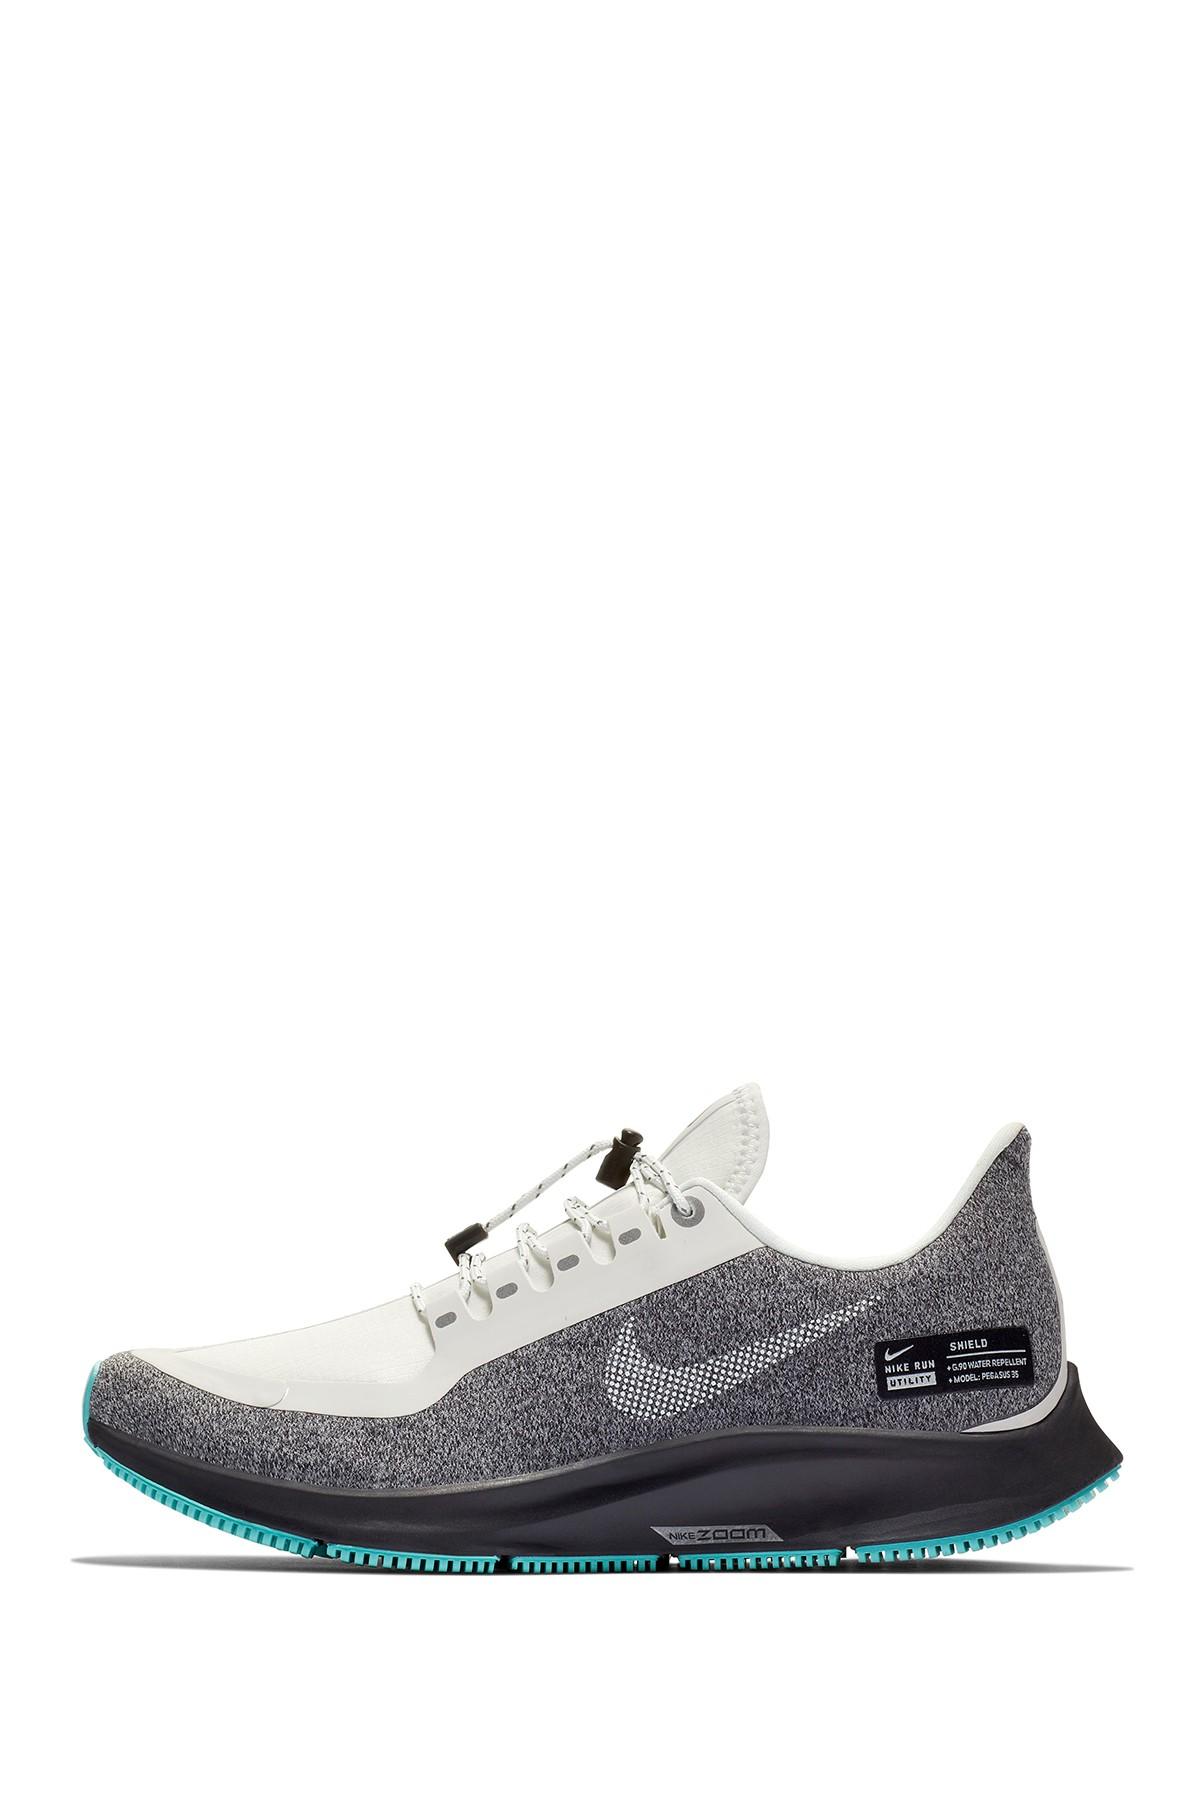 Nike Air Zoom Pegasus 35 Shield Gs Water Repellent Running Shoe in White |  Lyst